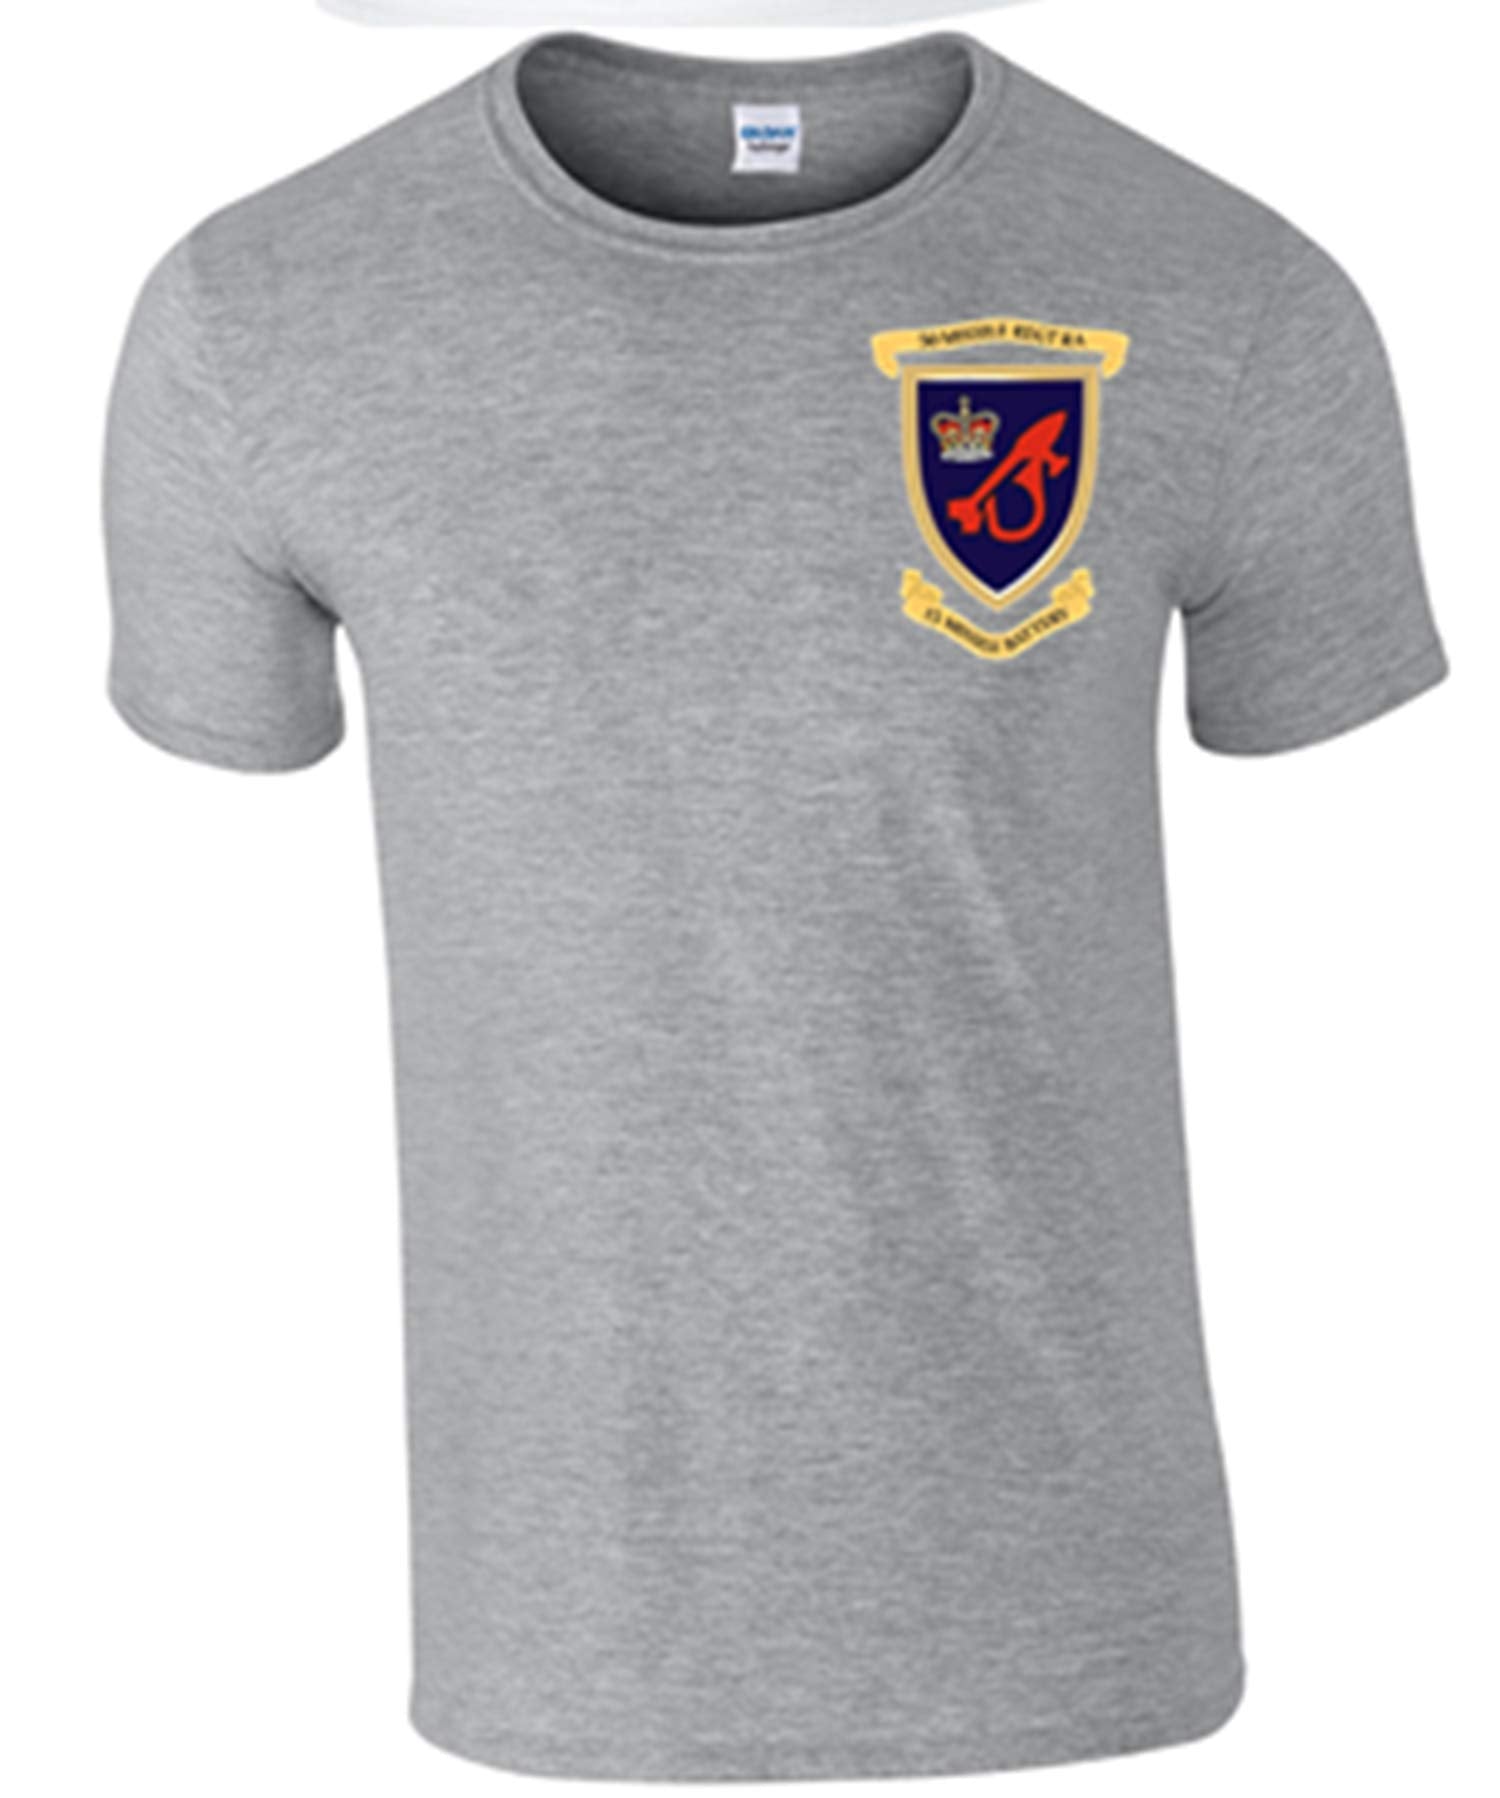 Army 1157 Kit Ministry of Defence T-Shirt 50 Missile Regiment with 15 Battery RA Logo on - Army 1157 kit Grey / L Army 1157 Kit